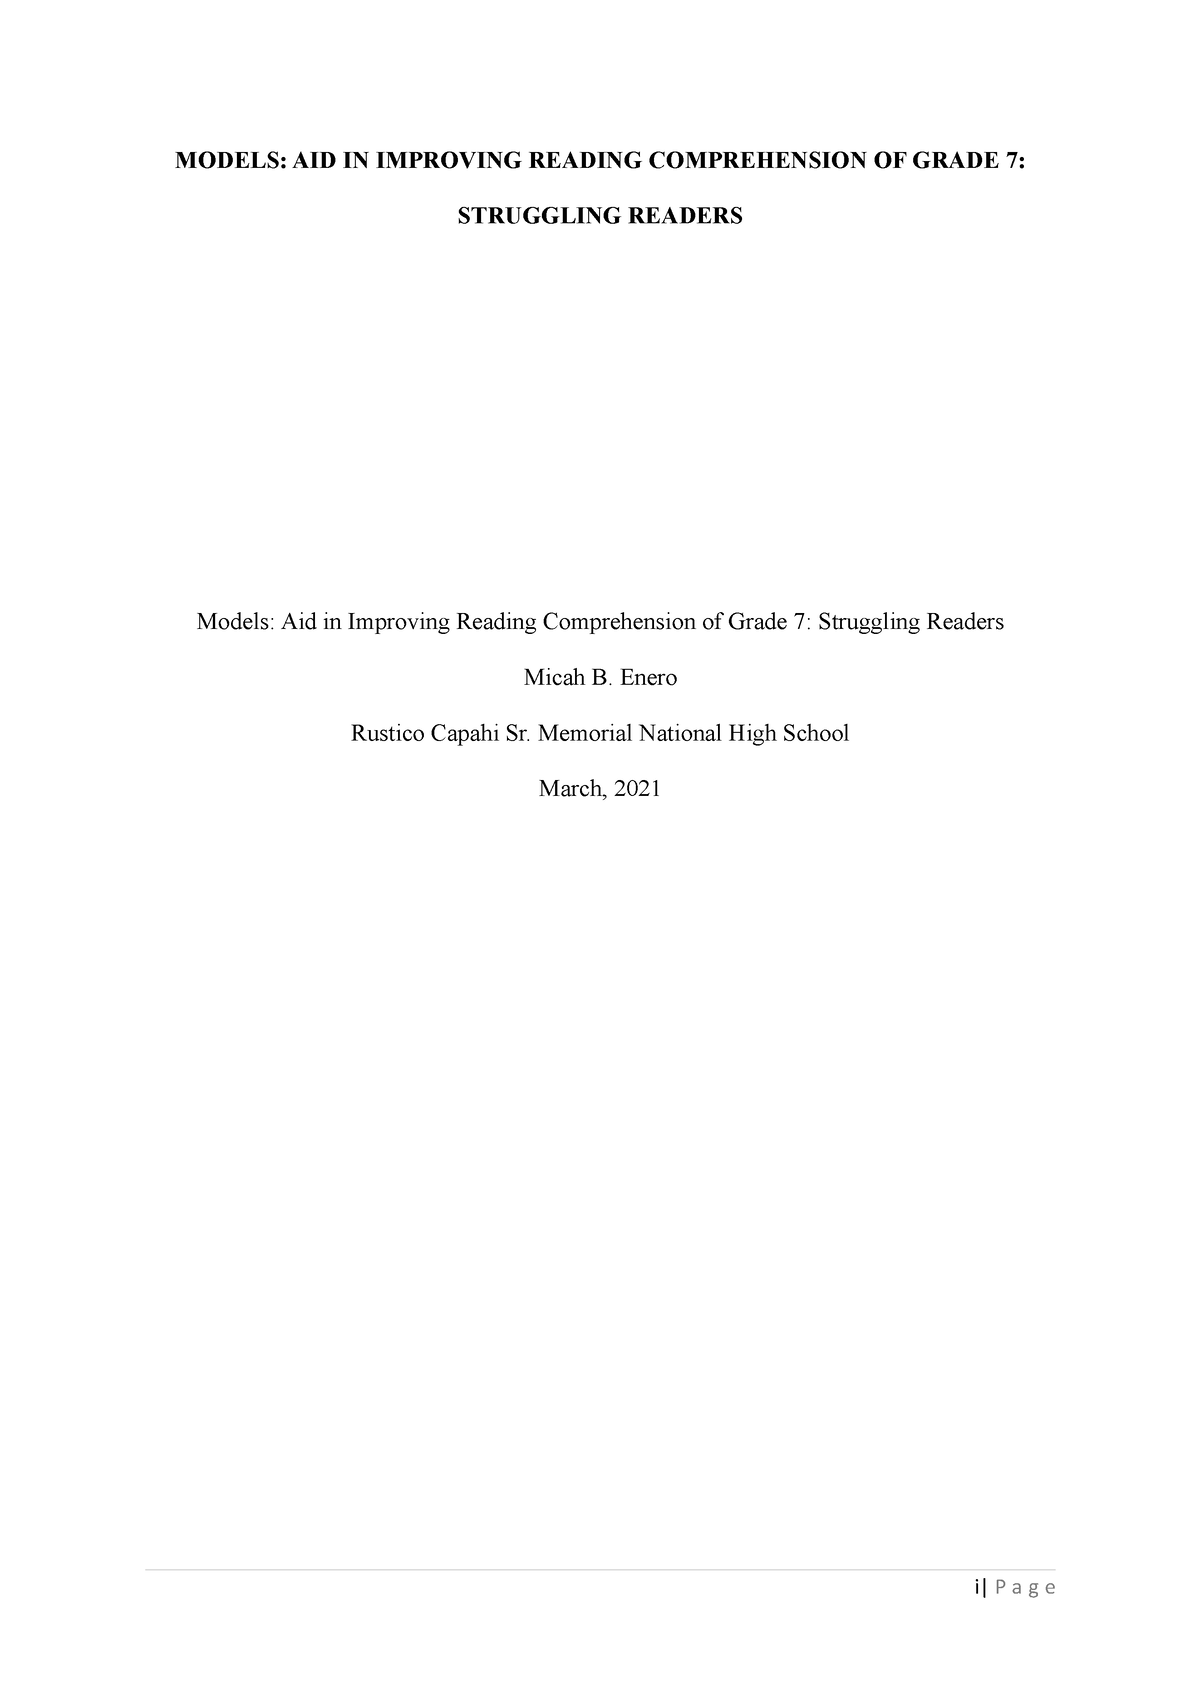 thesis title about reading difficulties